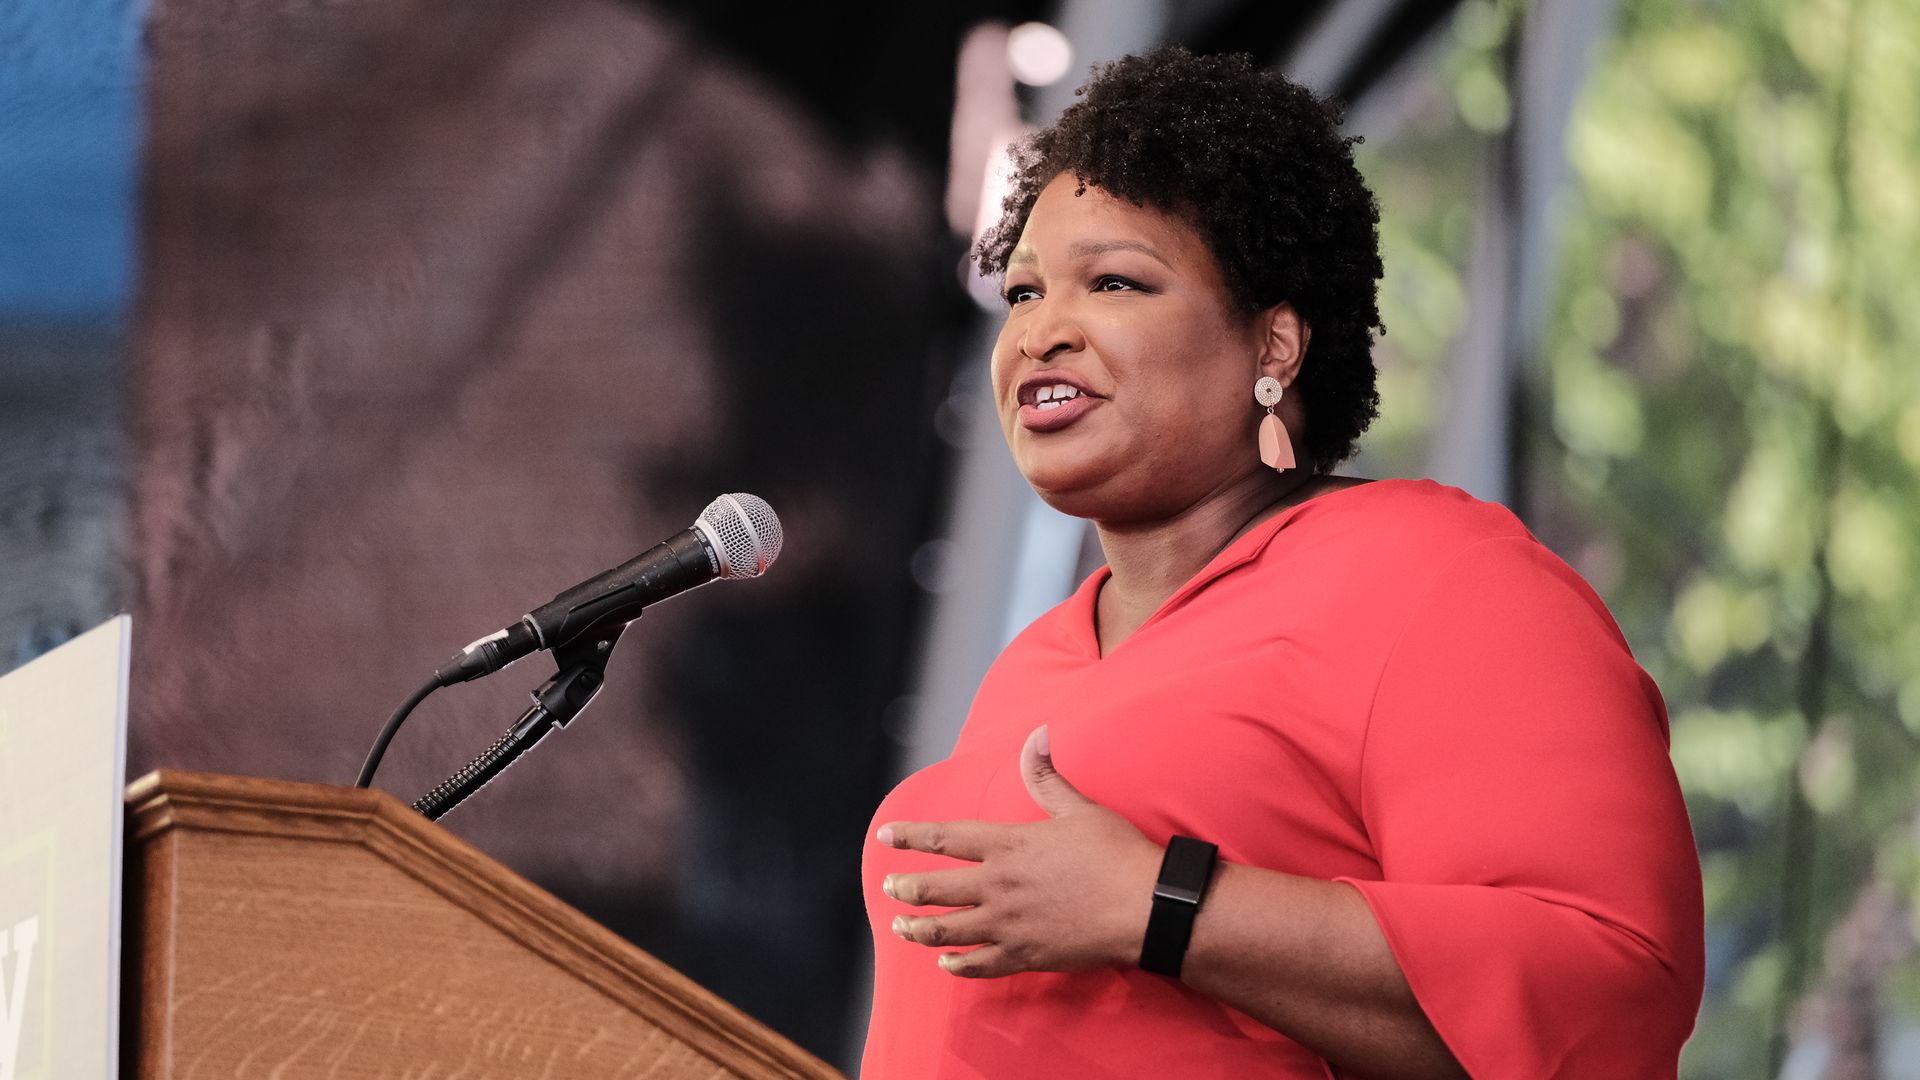 Photo of Stacey Abrams speaking from a podium on an outdoor stage